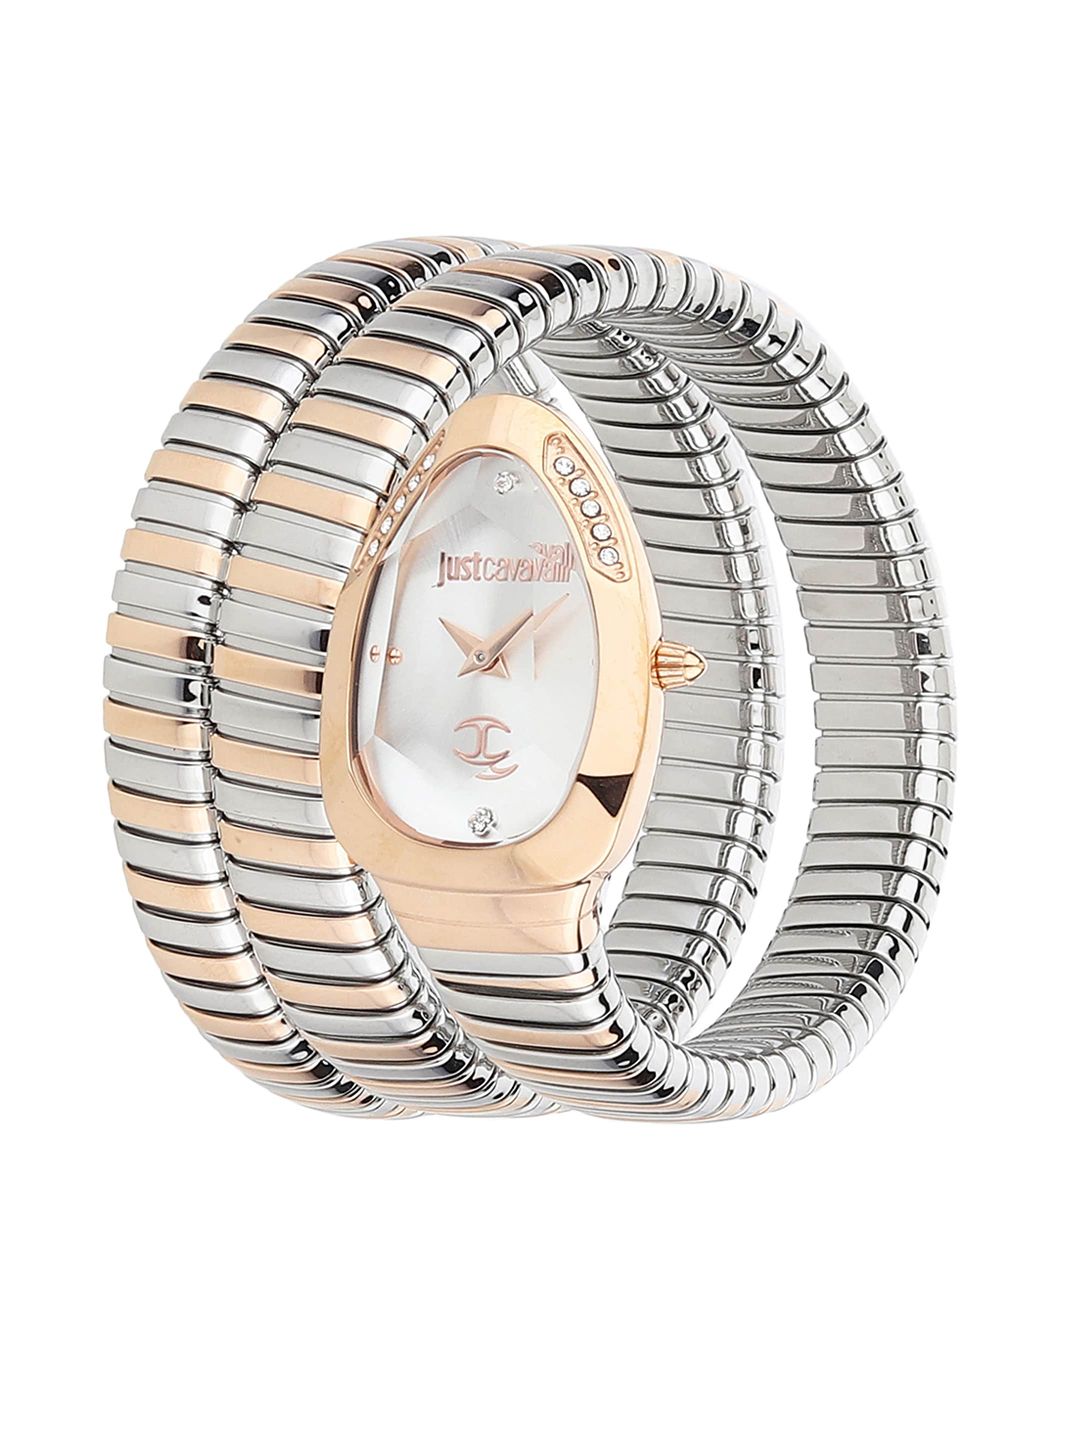 Just Cavalli Women Silver-Toned Brass Dial & Rose Gold Toned Stainless Steel Wrap Around Straps Analogue Watch Price in India